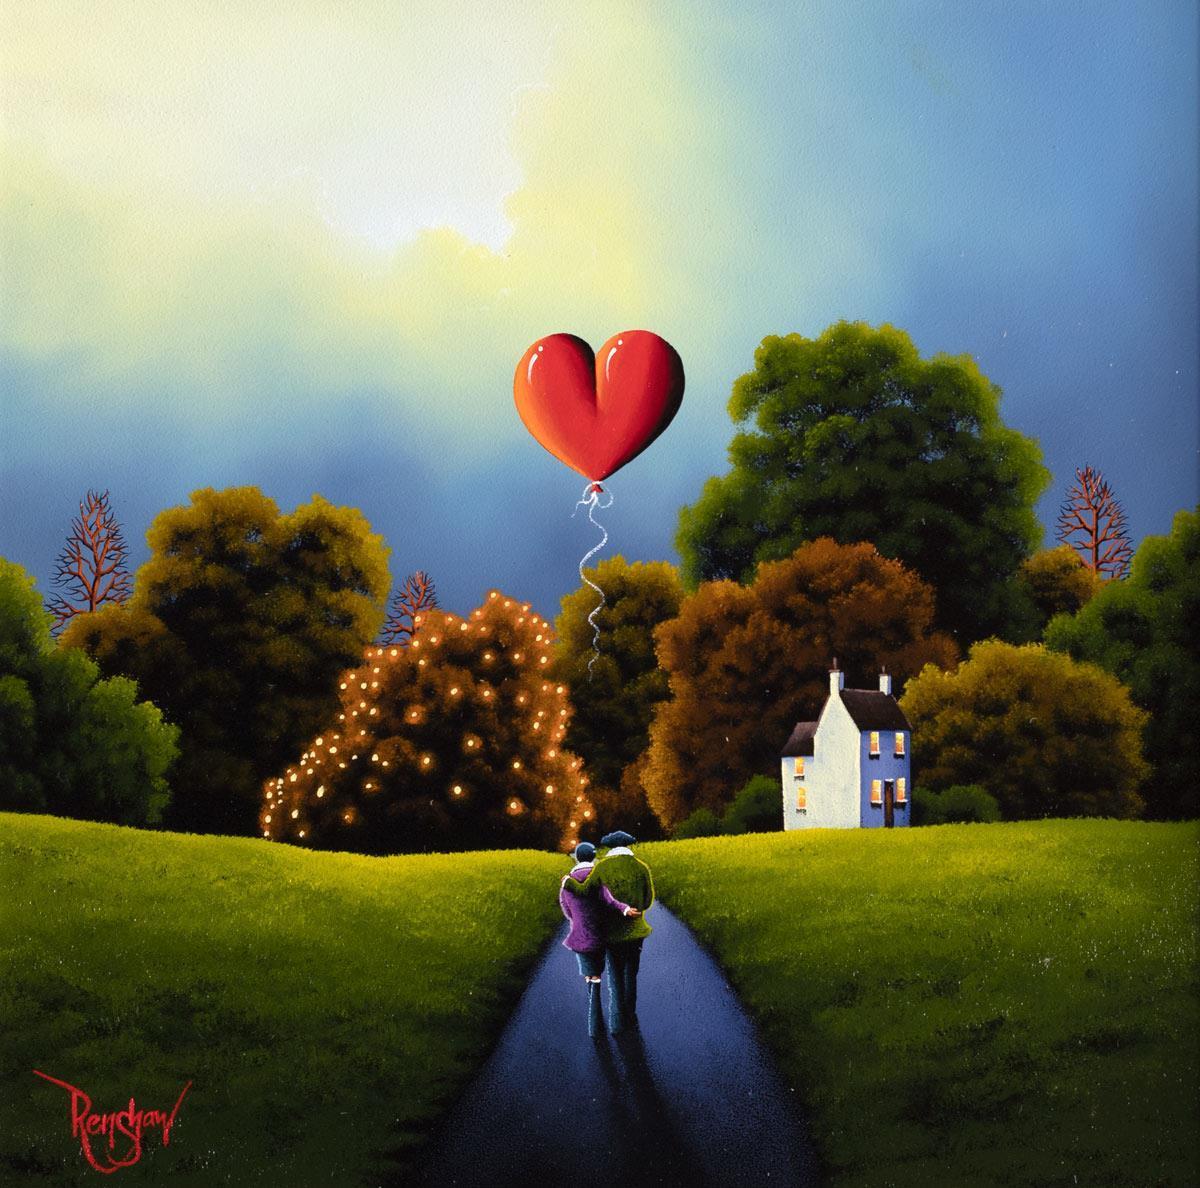 On Our Way Home David Renshaw